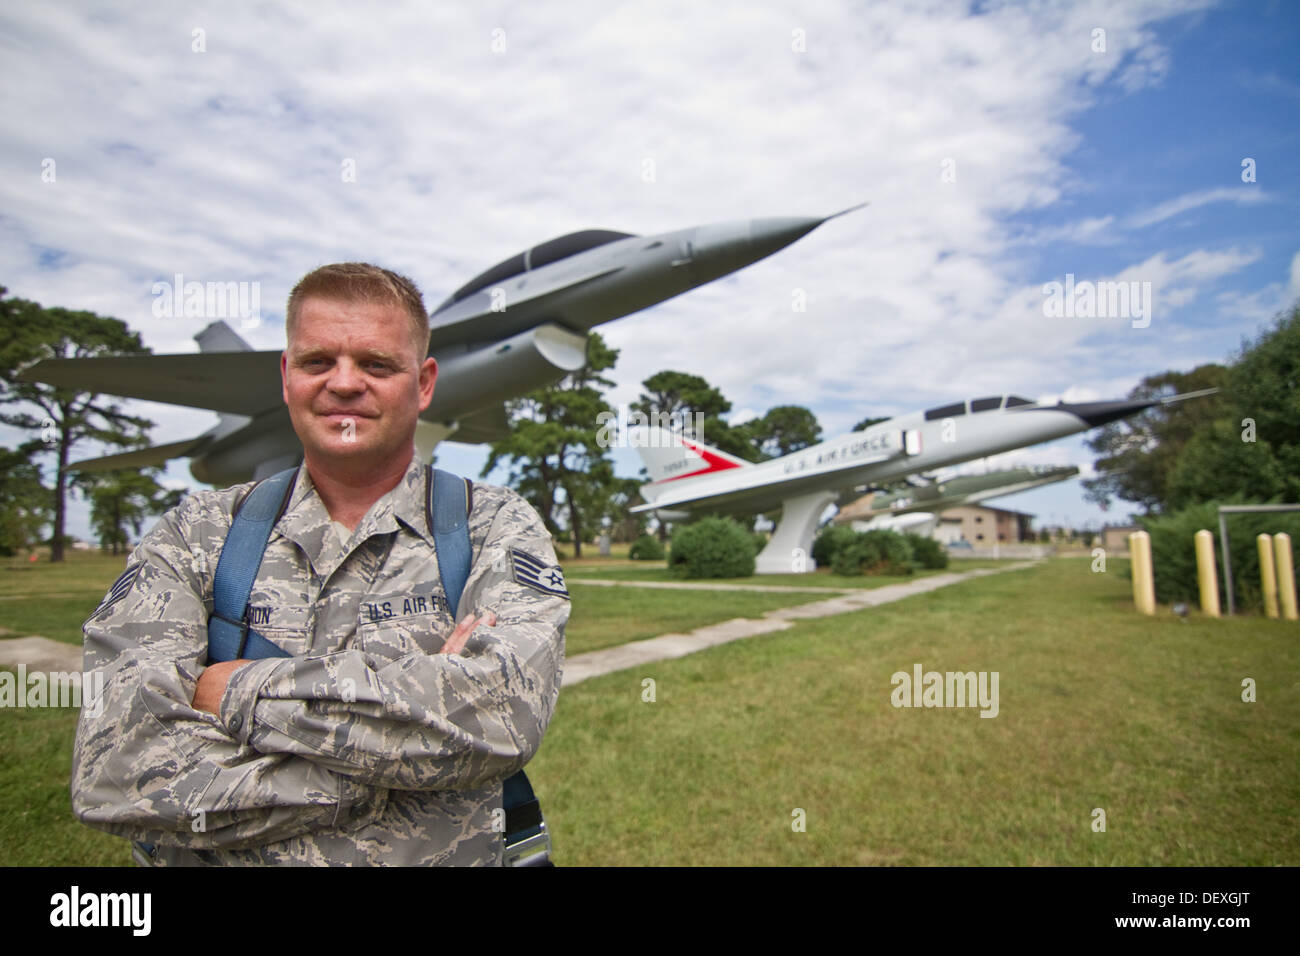 U.S. Air Force Staff Sgt. Bryan Lemmon from the New Jersey Air National Guard's 177th Fighter Wing stands in front of the F-106B Delta Dart and the F-16B Fighting Falcon he has been restoring at Atlantic City International Airport, N.J. on Sept. 13. The a Stock Photo